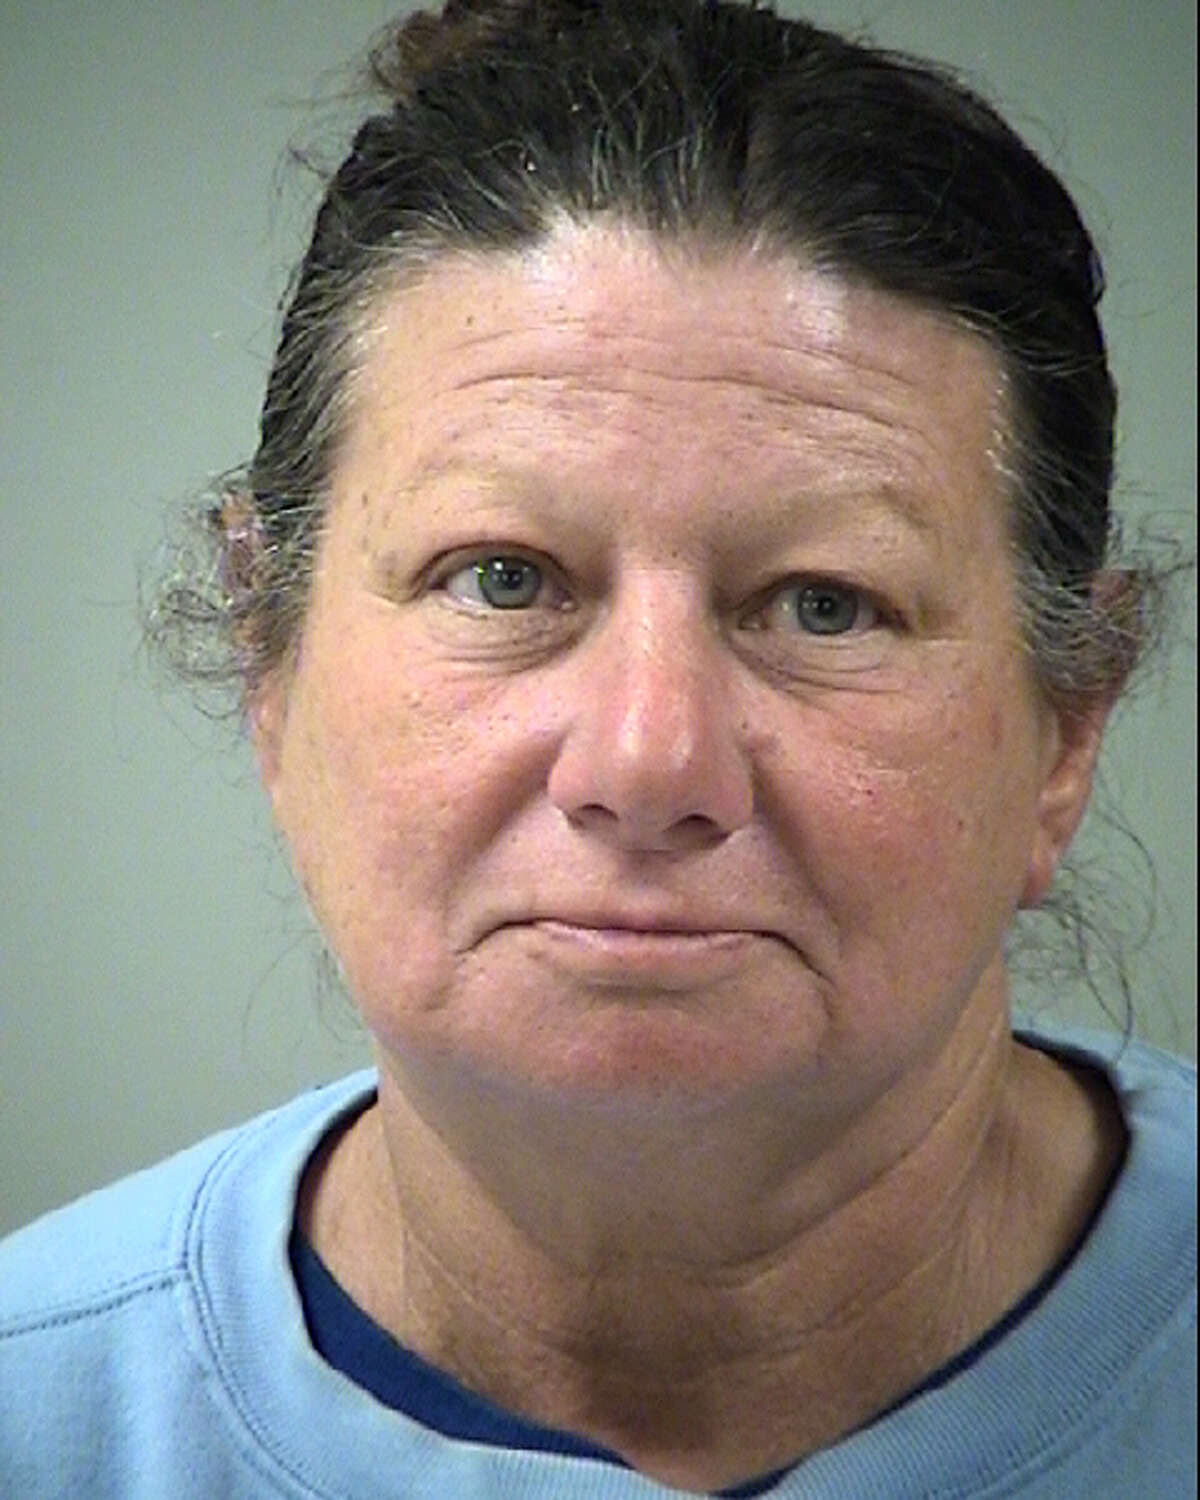 Victoria Jamvold, 59, faces a Class A misdemeanor charge of cruelty to a non-livestock animal, according to court documents.